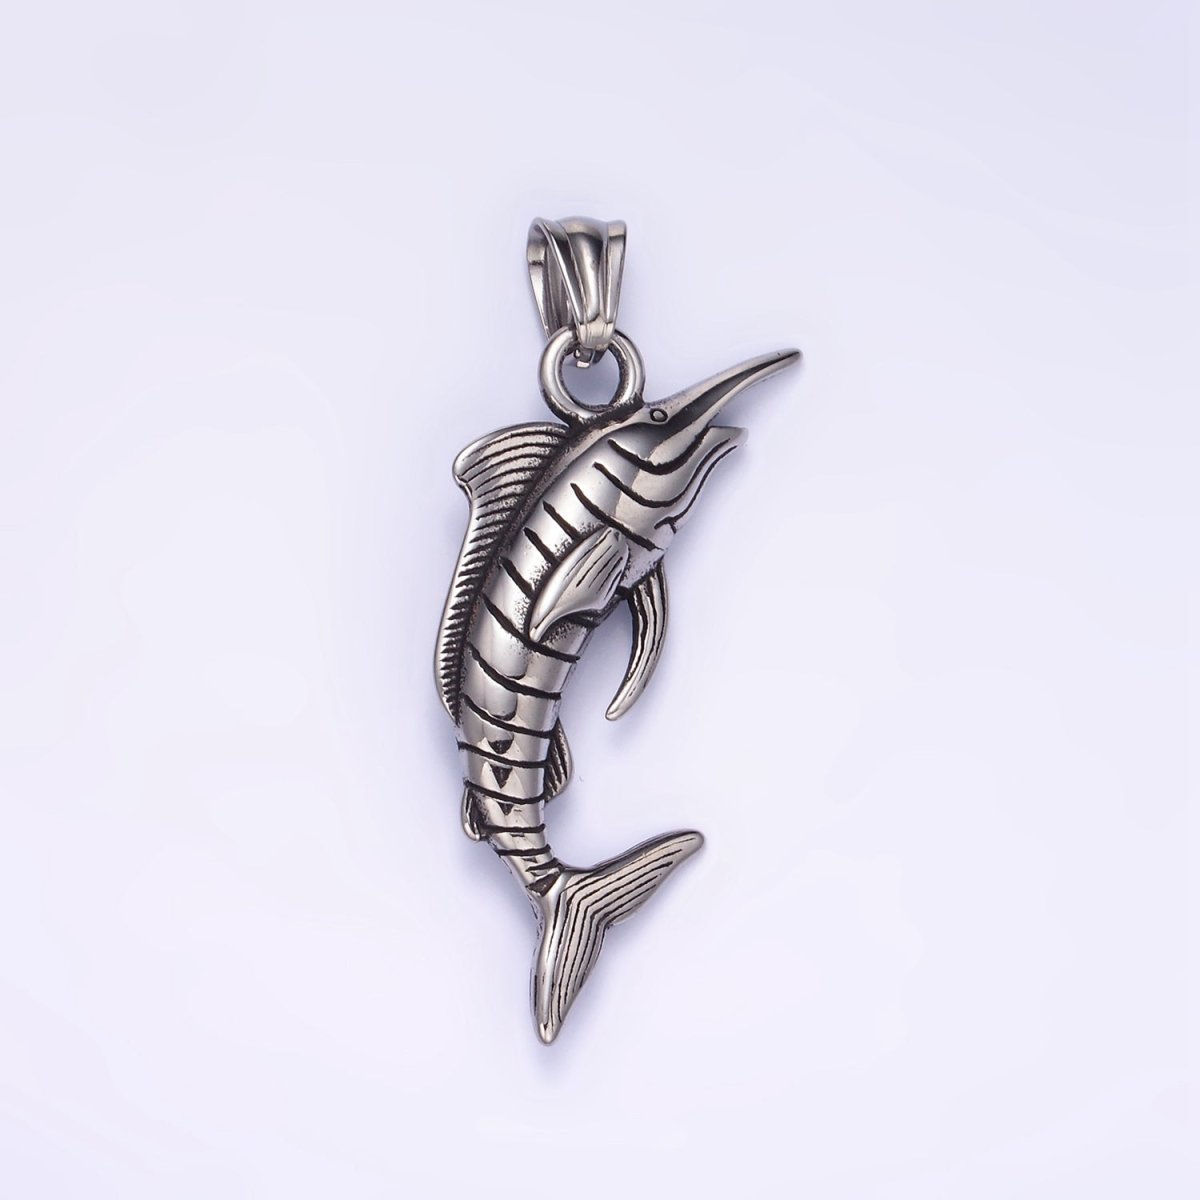 Stainless Steel Marlin Fish Charms Pendant in Gold & Silver | P1441 P1442 - DLUXCA